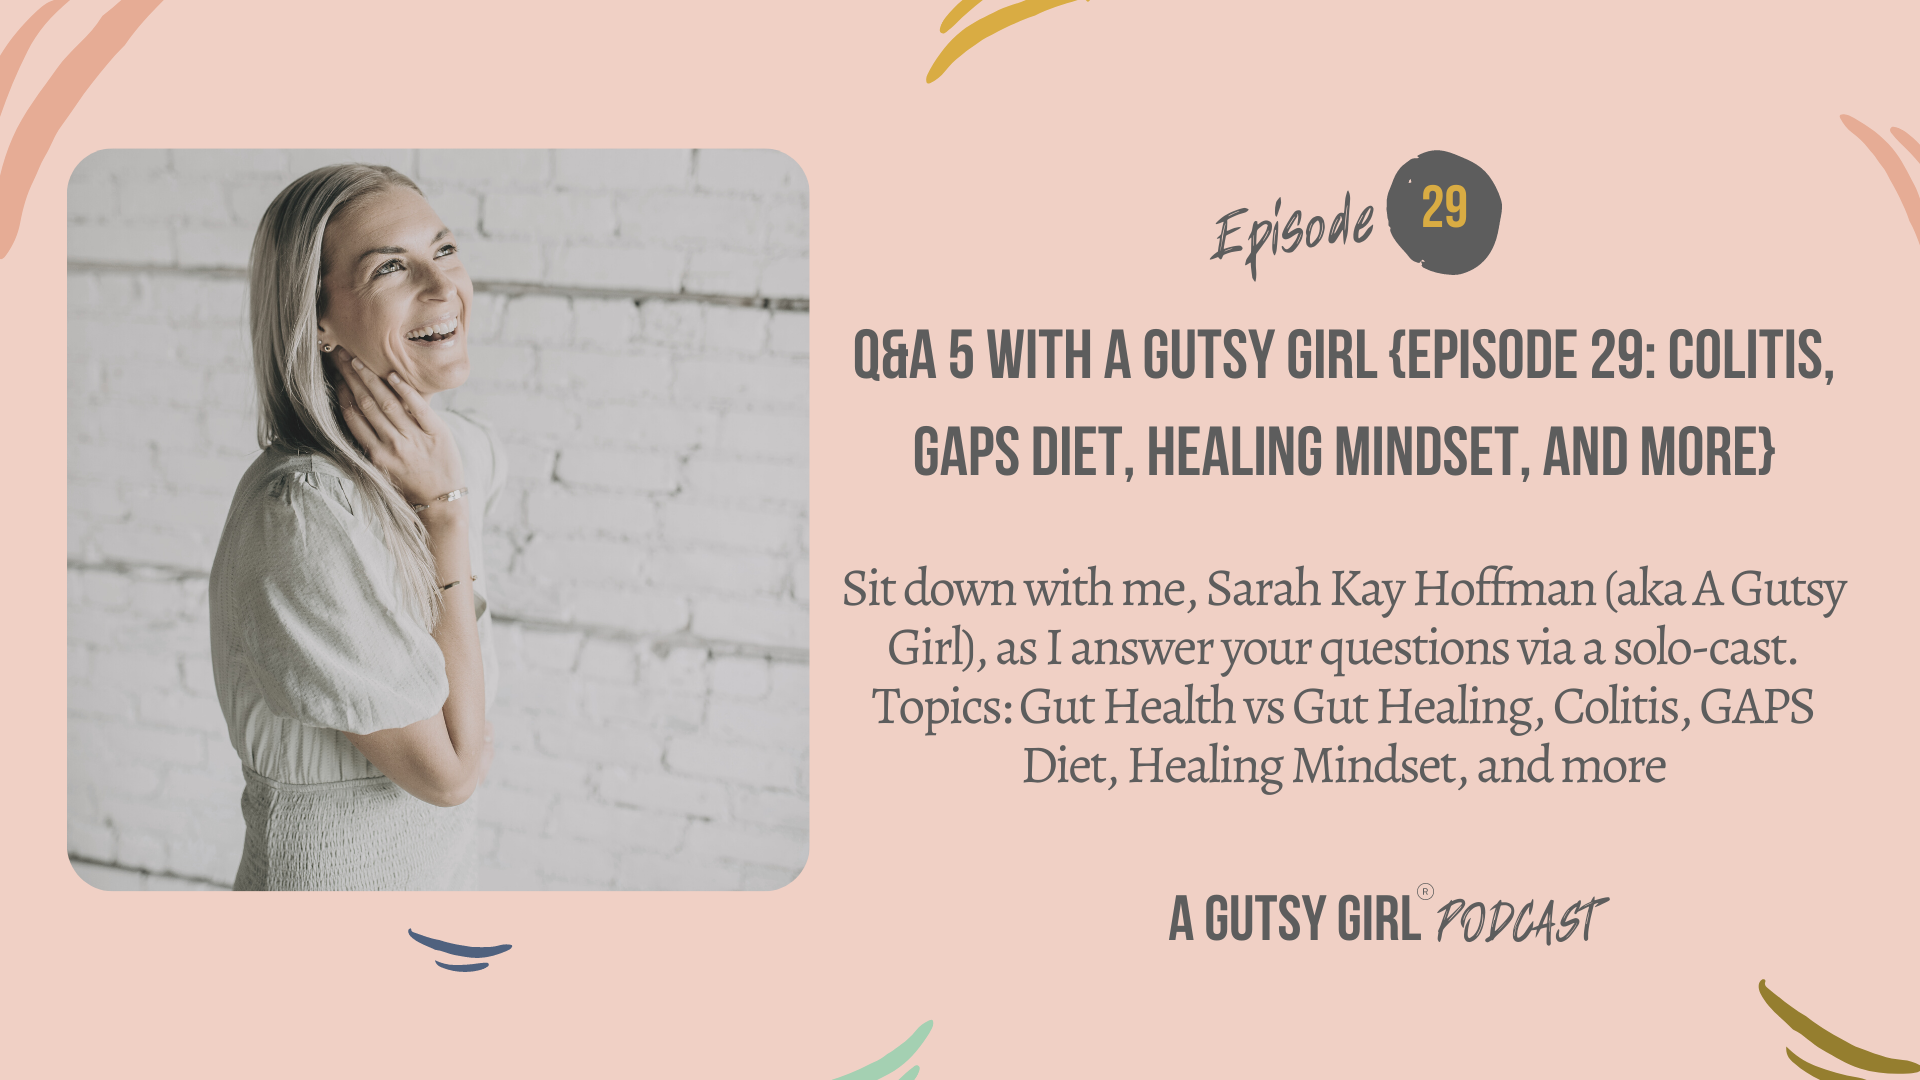 Q&A 5 with A Gutsy Girl {Episode 29: Colitis, GAPS Diet, Healing Mindset, and more}